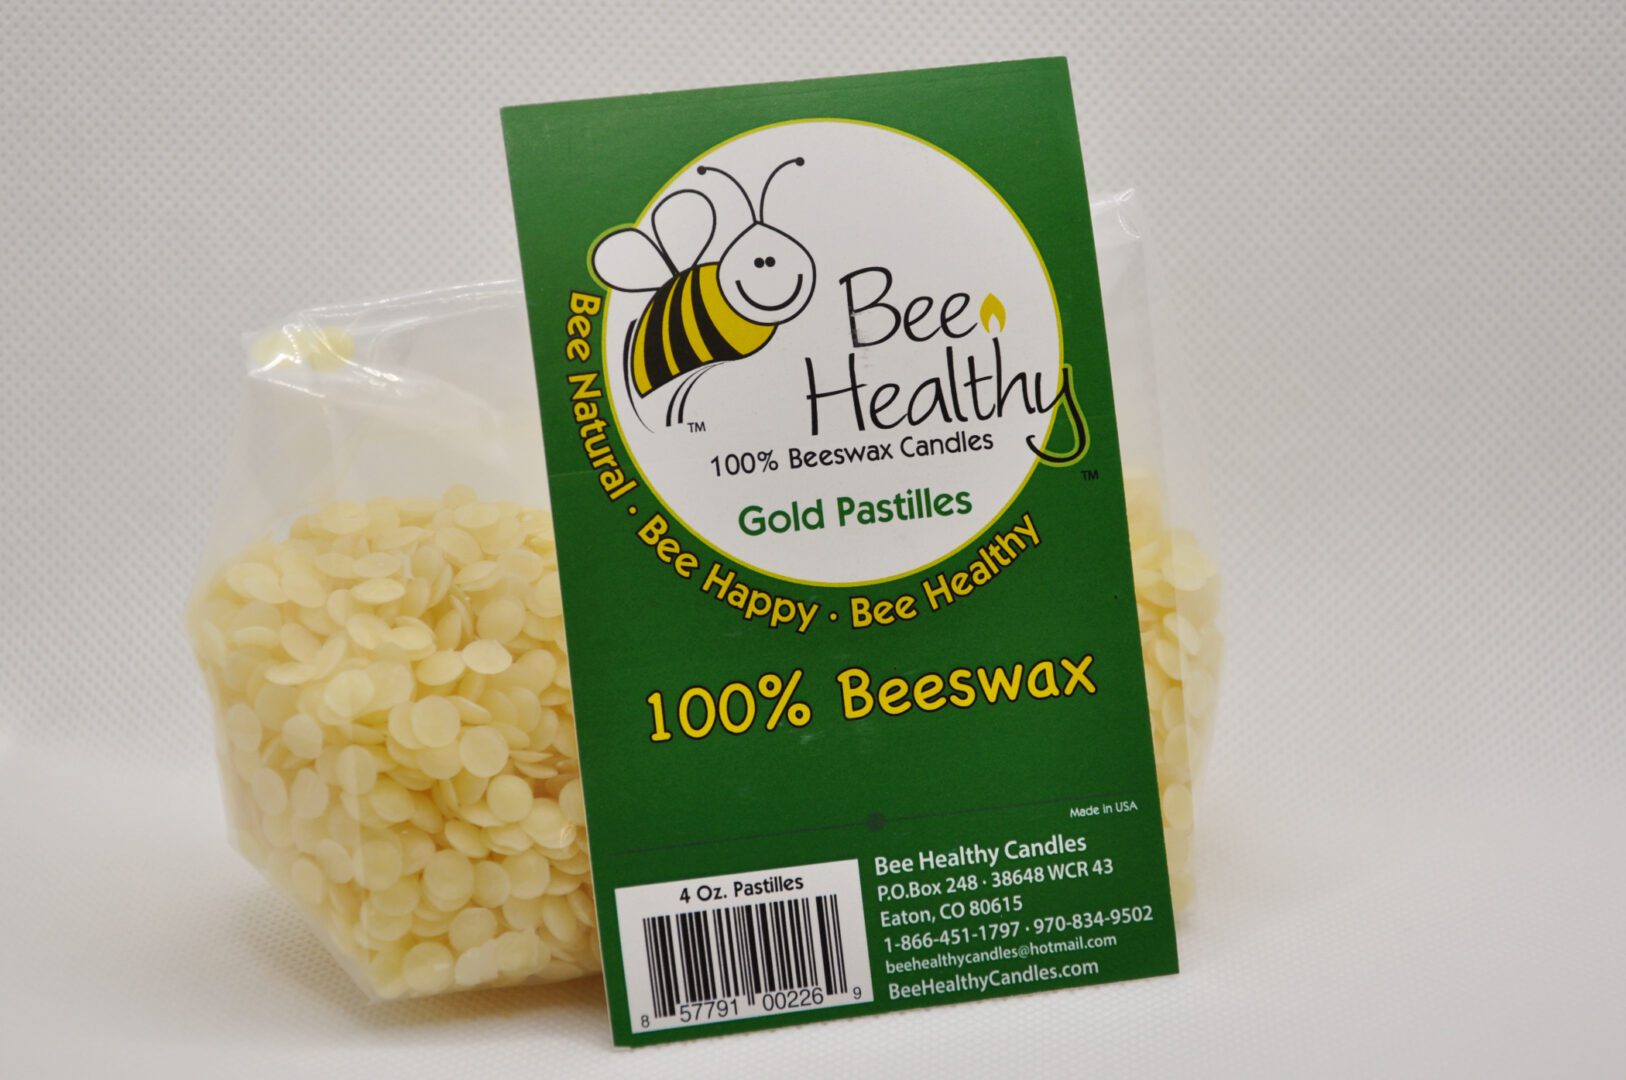 White 100% Beeswax Pastilles Product of USA 